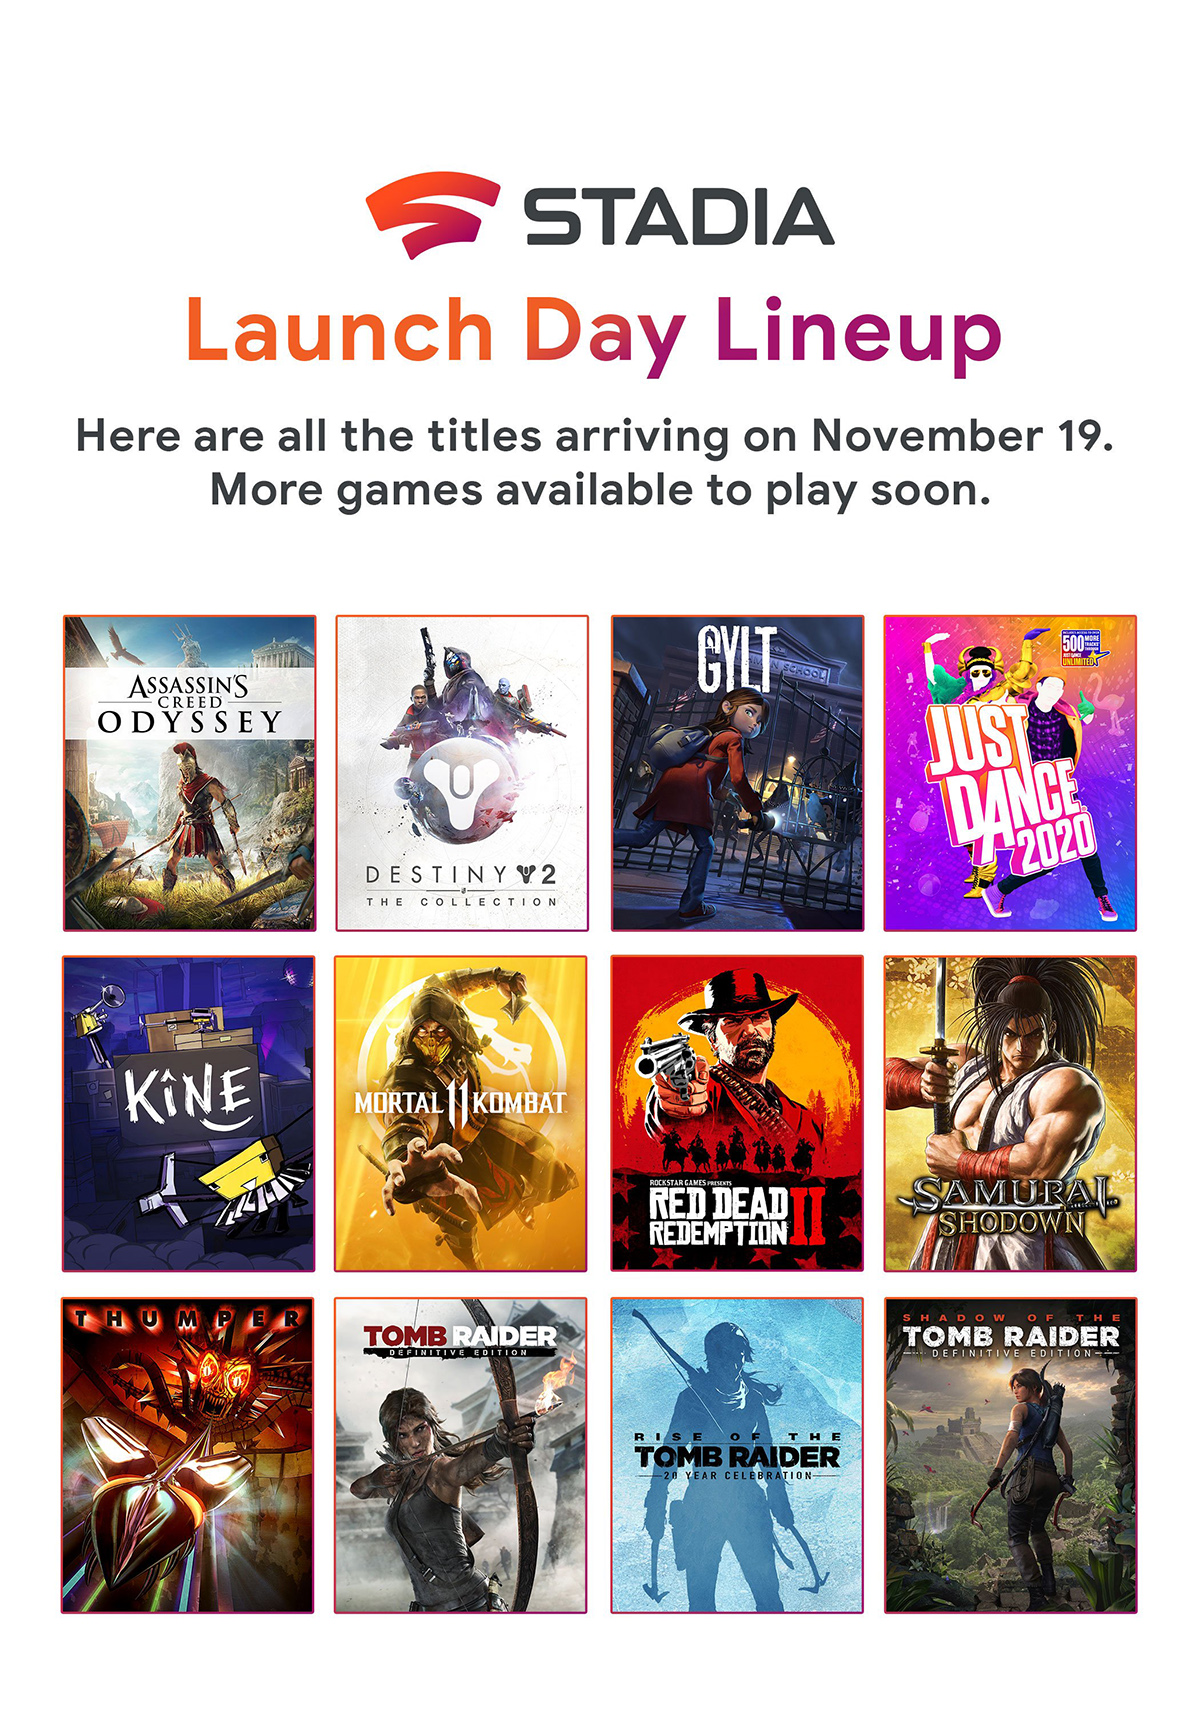 Google reveals its Stadia launch lineup just days before release